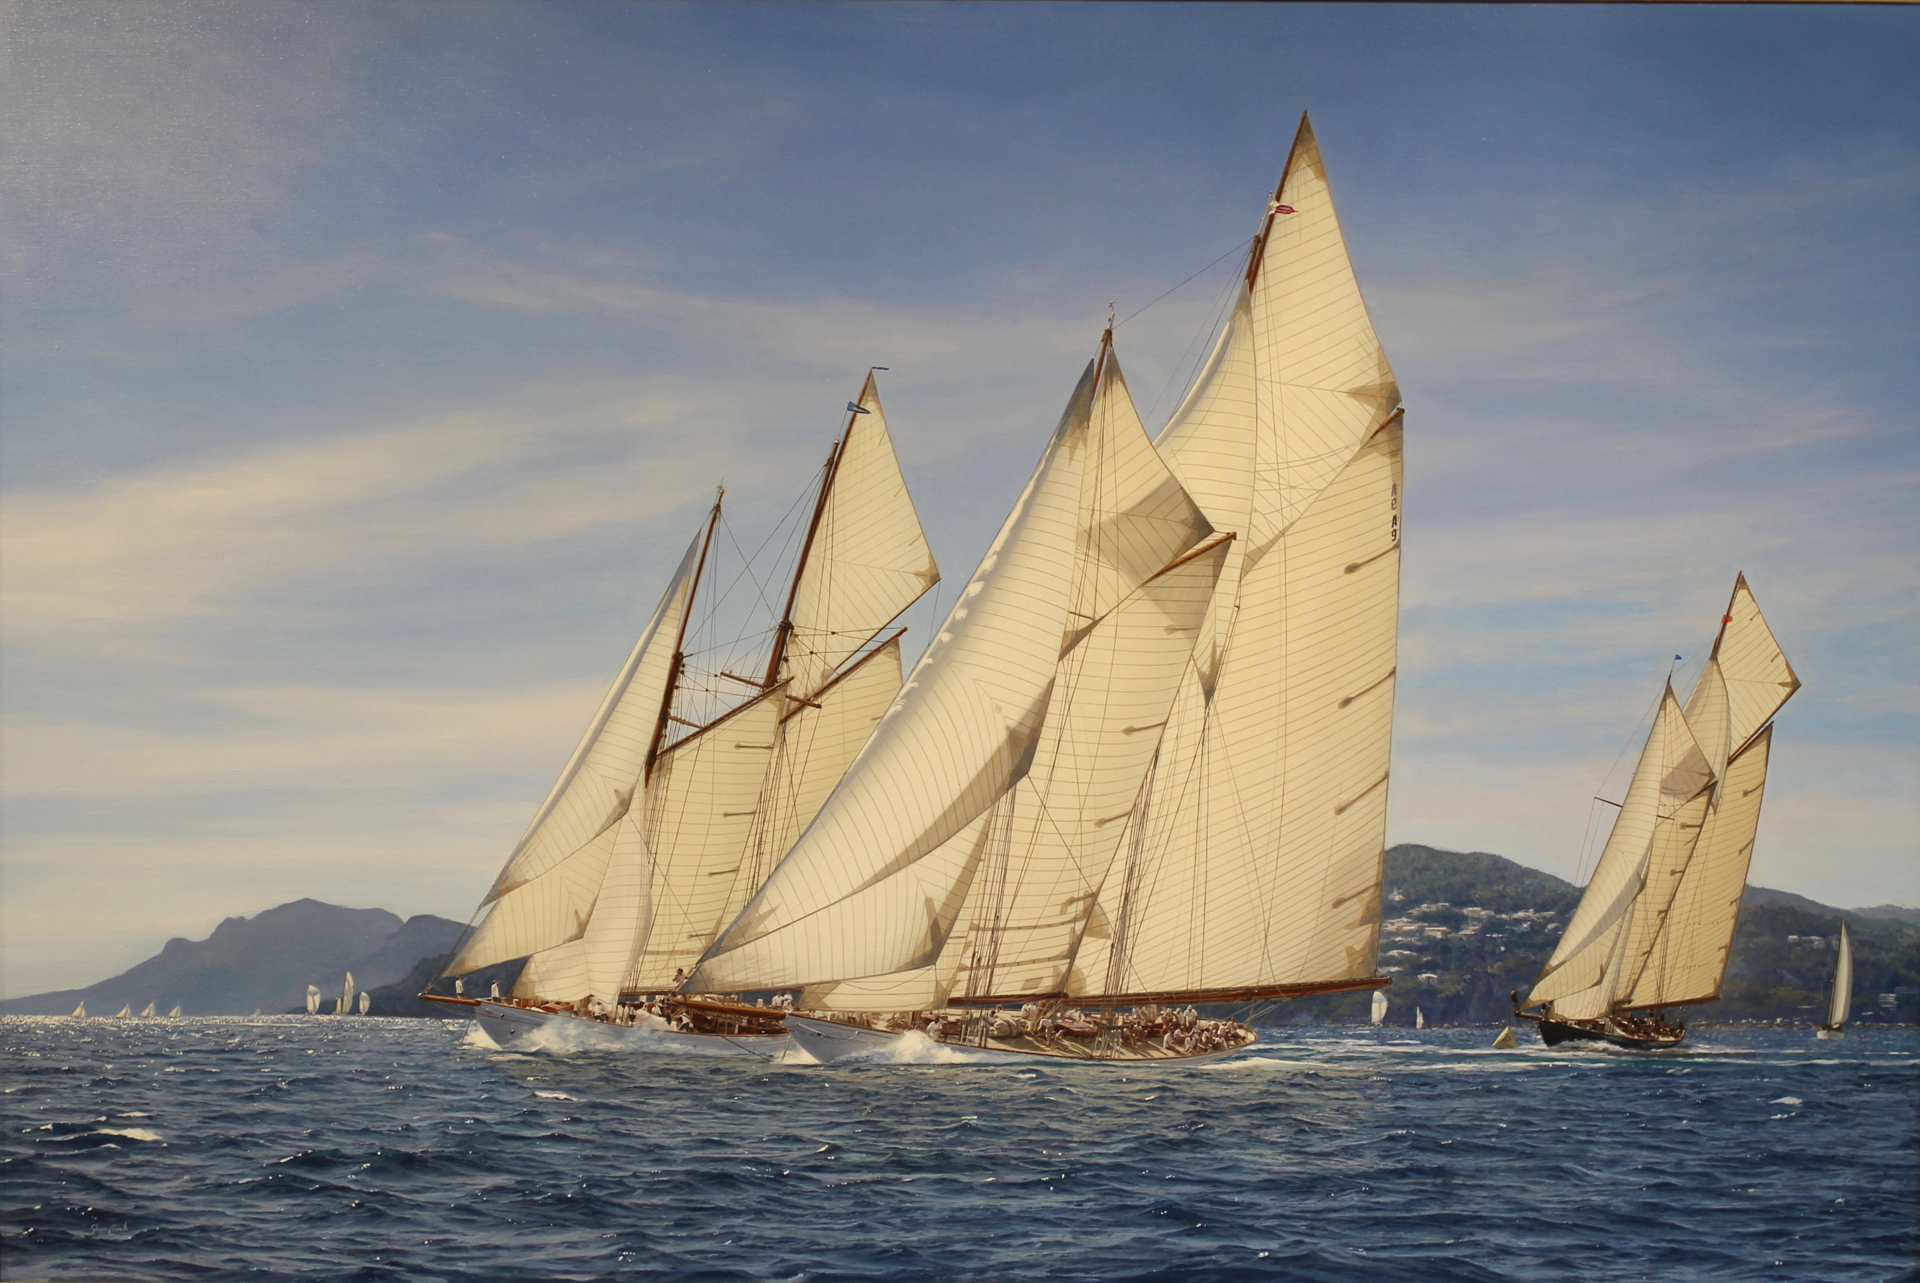 Racing off Cannes by Shane Michael Couch